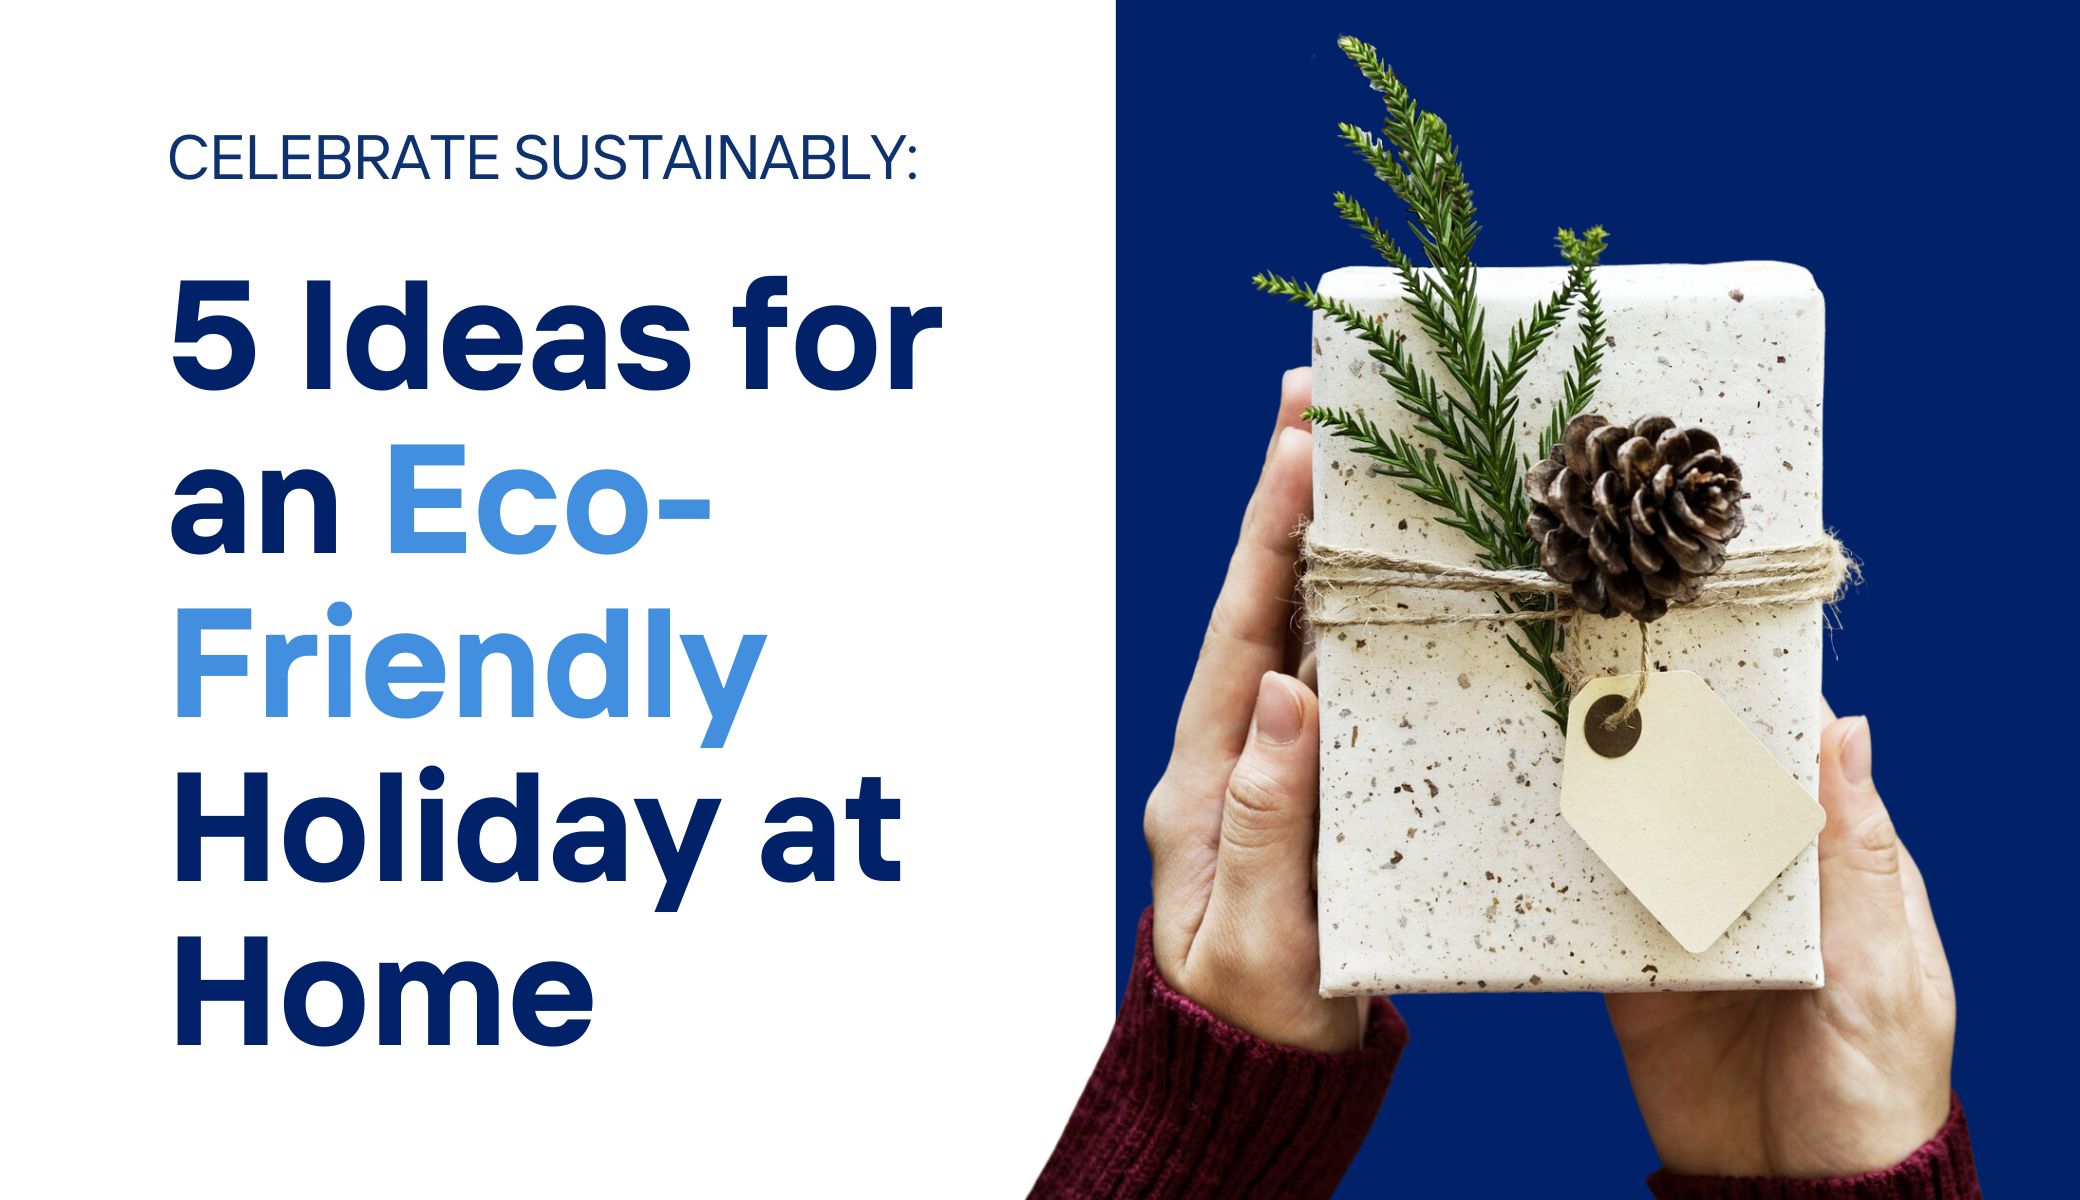 Celebrate Sustainably 5 Ideas for an Eco-Friendly Holiday at Home